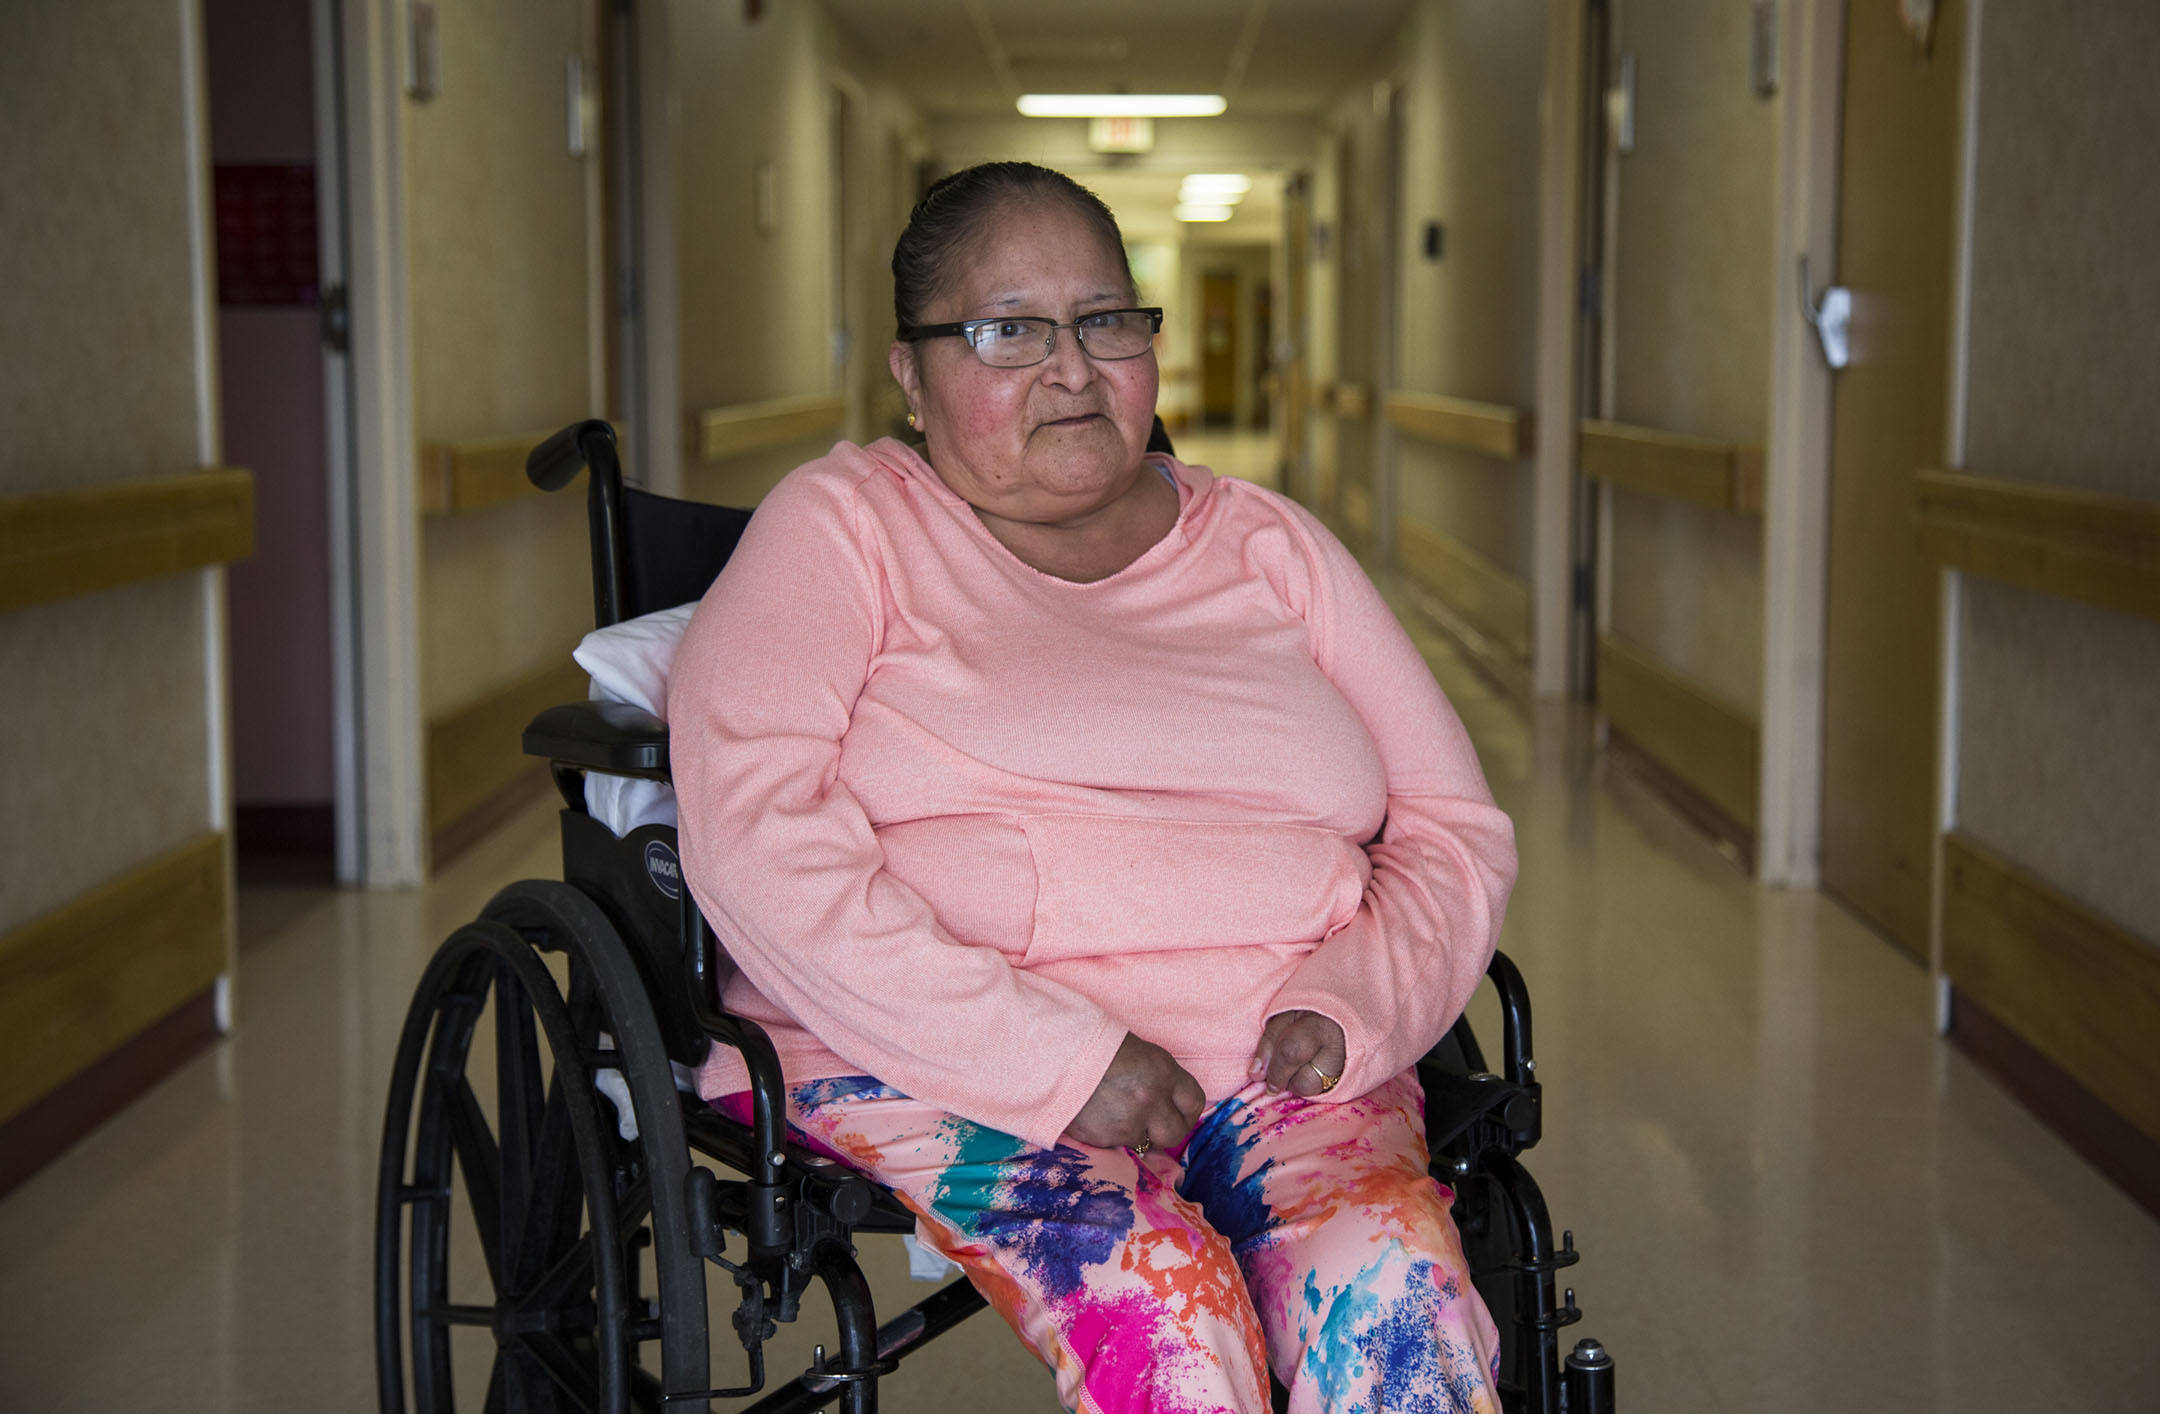 TroyLnn Shotgunn, 51, has been a resident of the Awe Kualawaache Care Center in Crow Agency for almost two years. She is one of the few residents that experienced the center’s transition from private to tribal management.